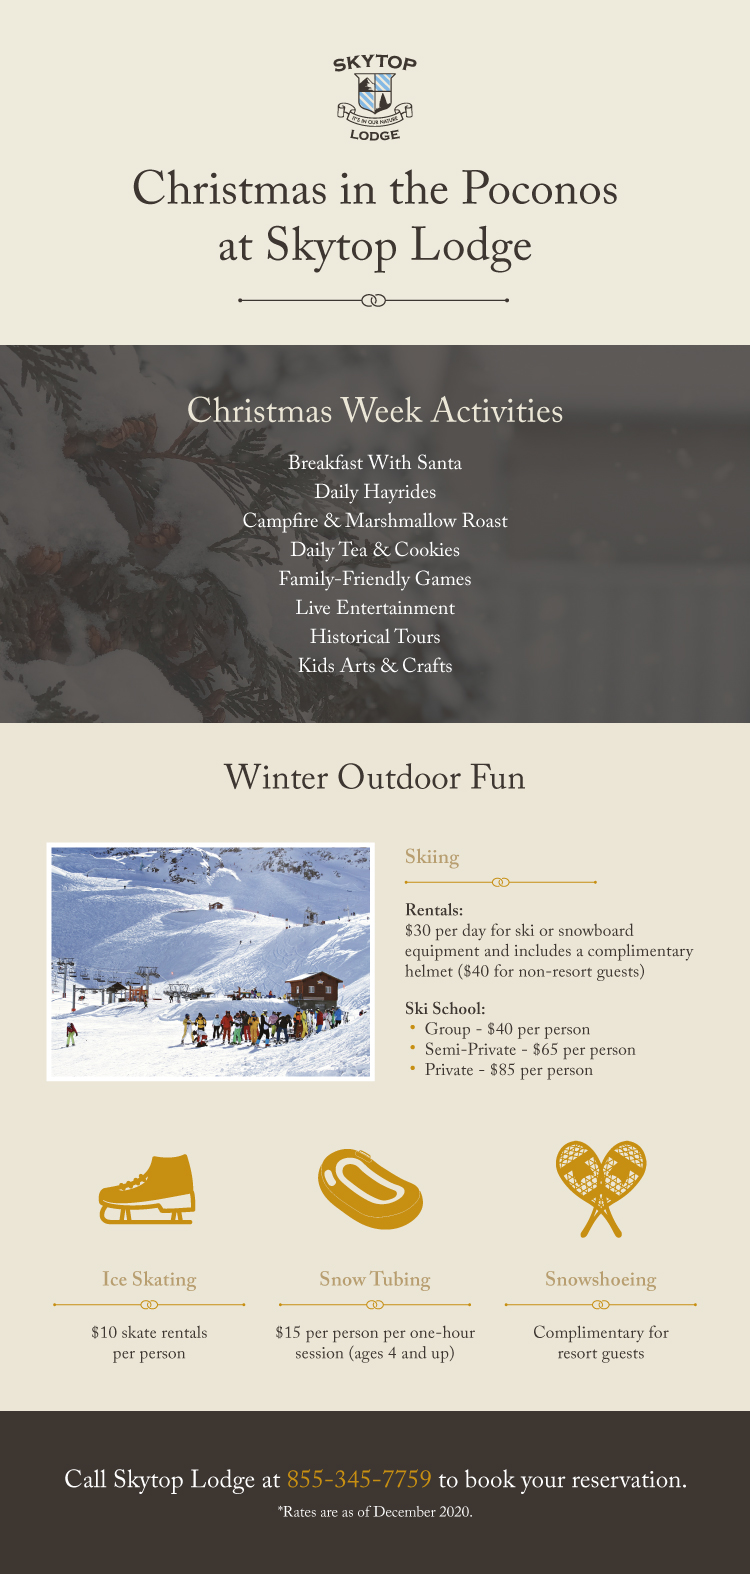 Christmas events in the Poconos | Skytop Lodge